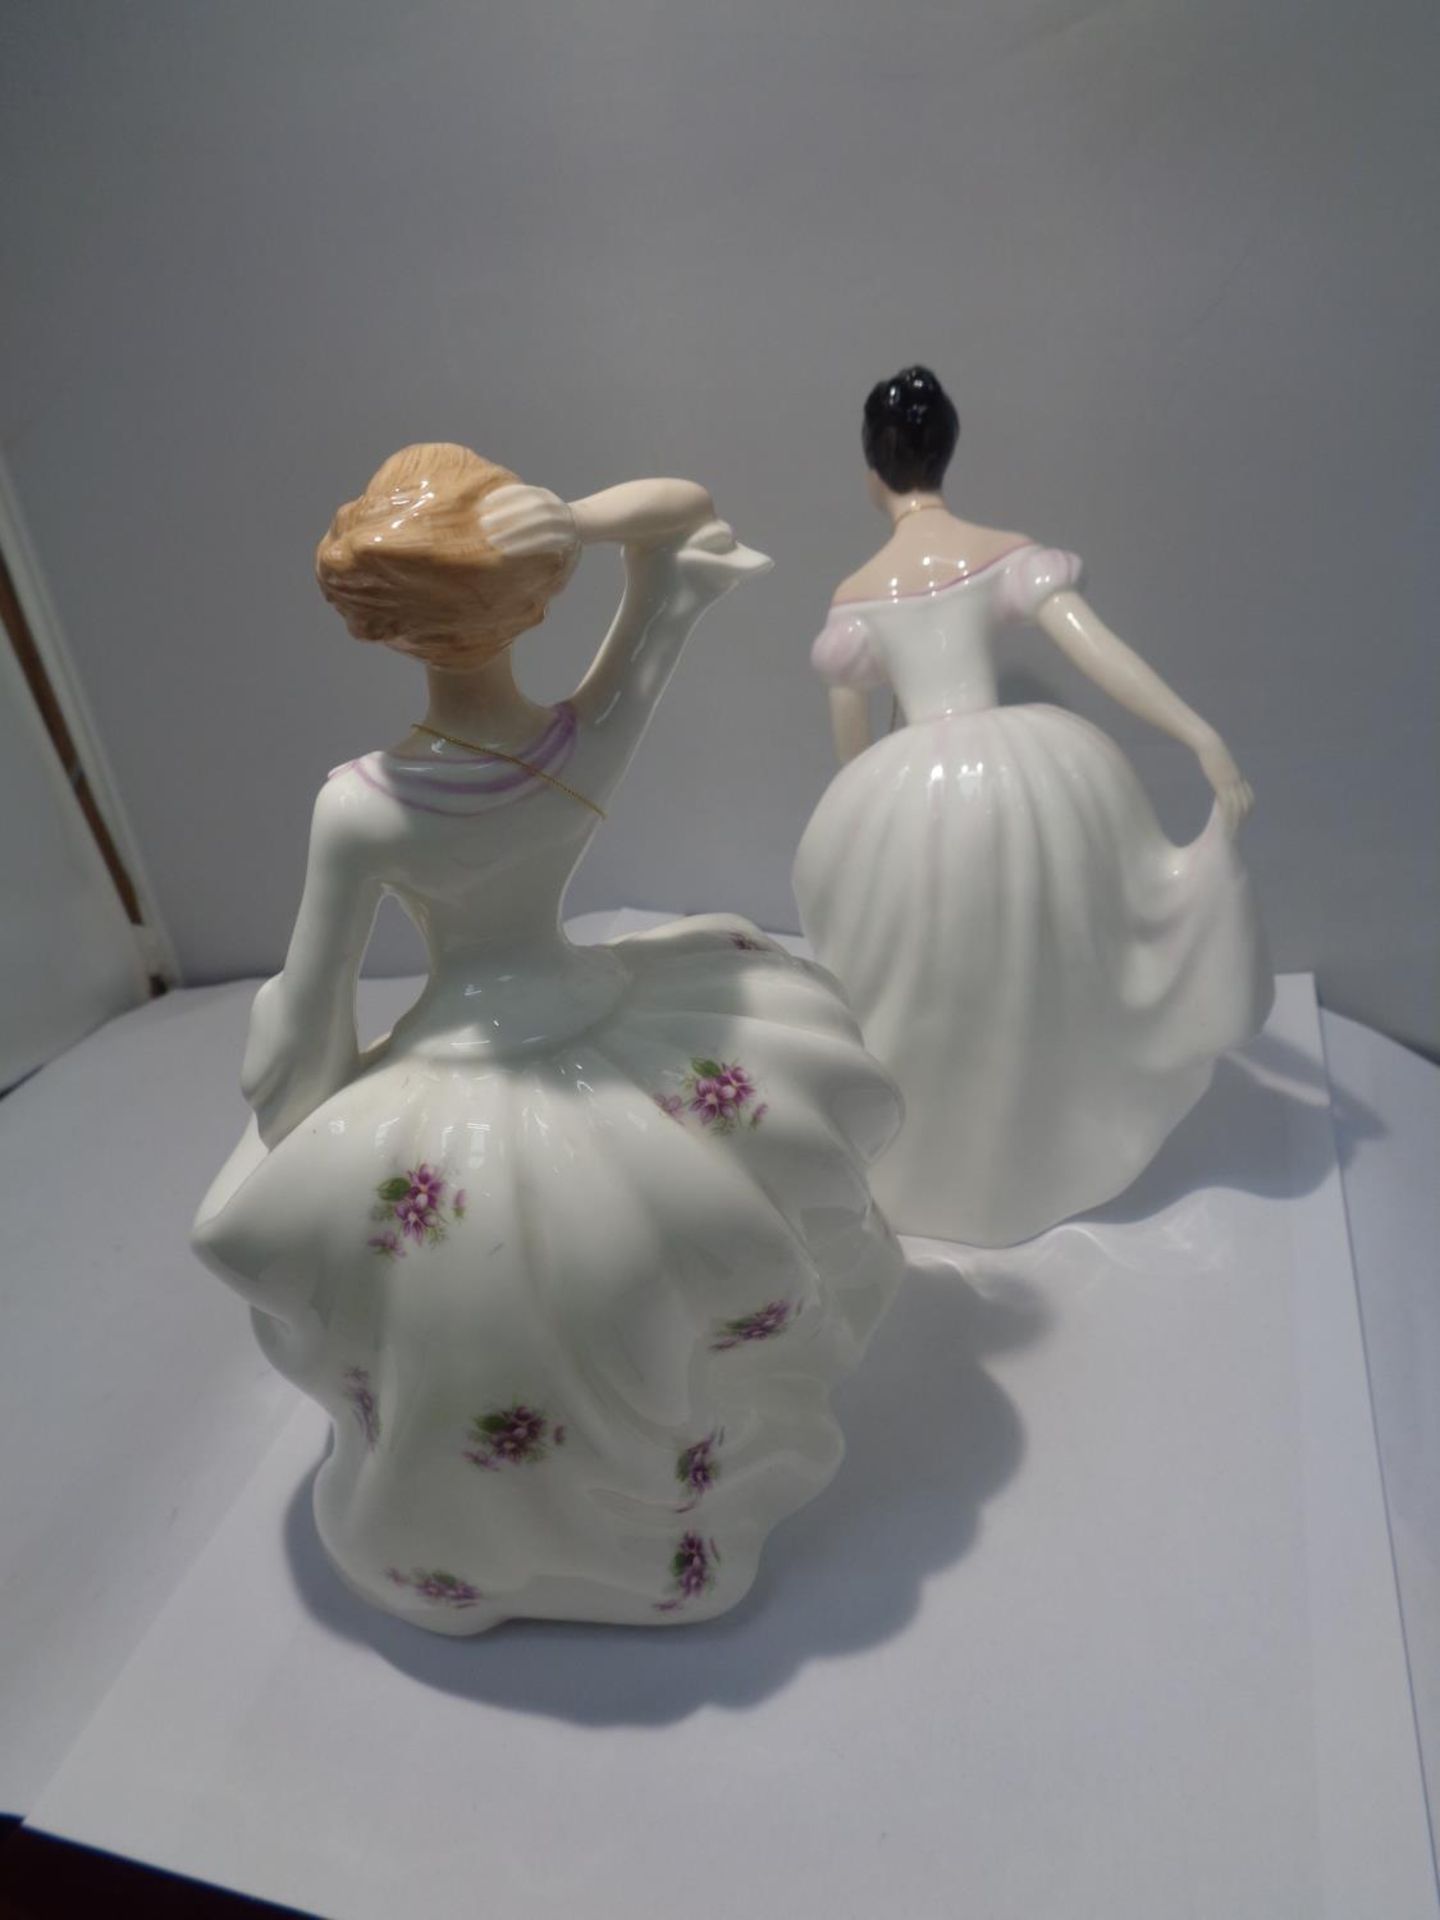 TWO ROYAL DOULTON FIGURINES MAUREEN AND DANIELLE - Image 3 of 5